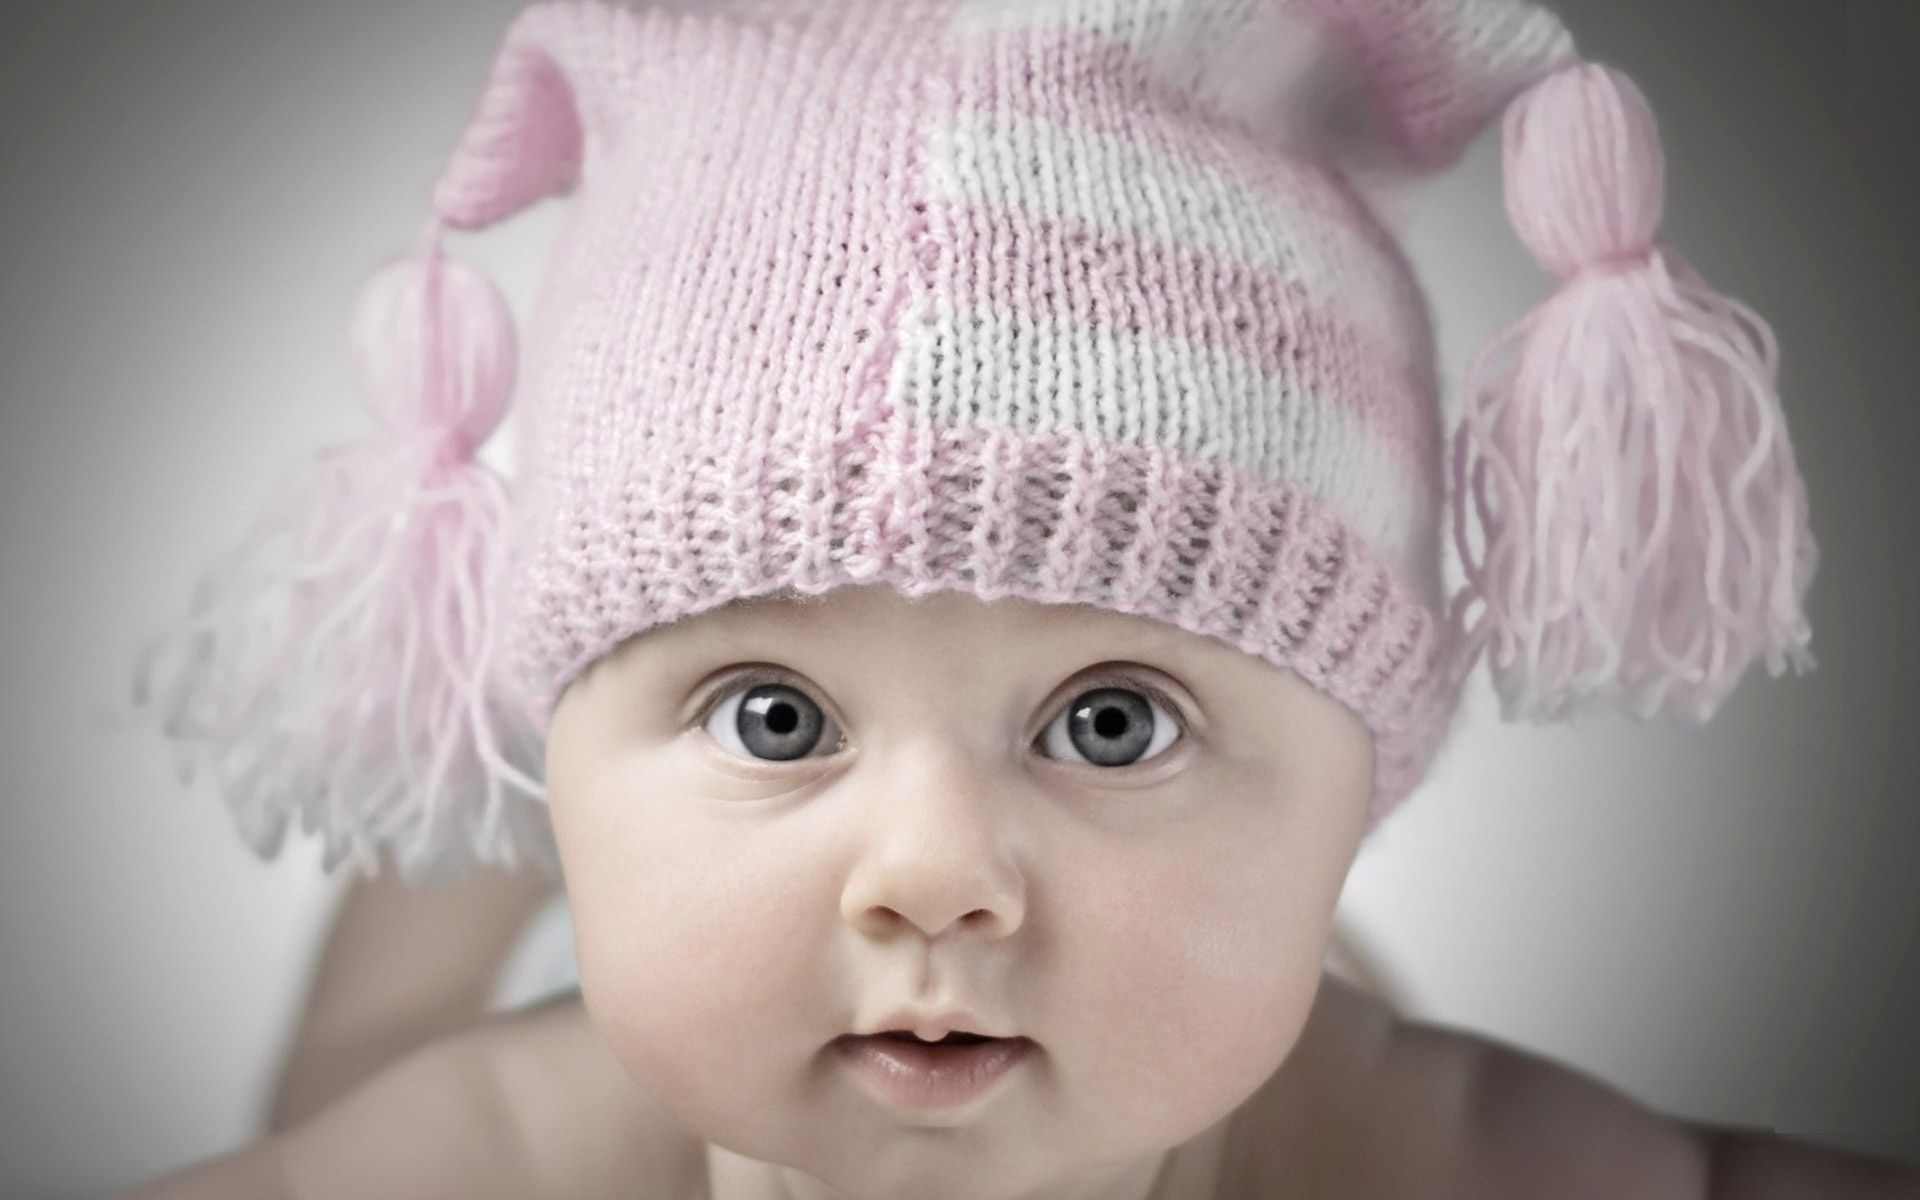 Cute and sweet babies hd wallpaper pics and images | Free HD ...